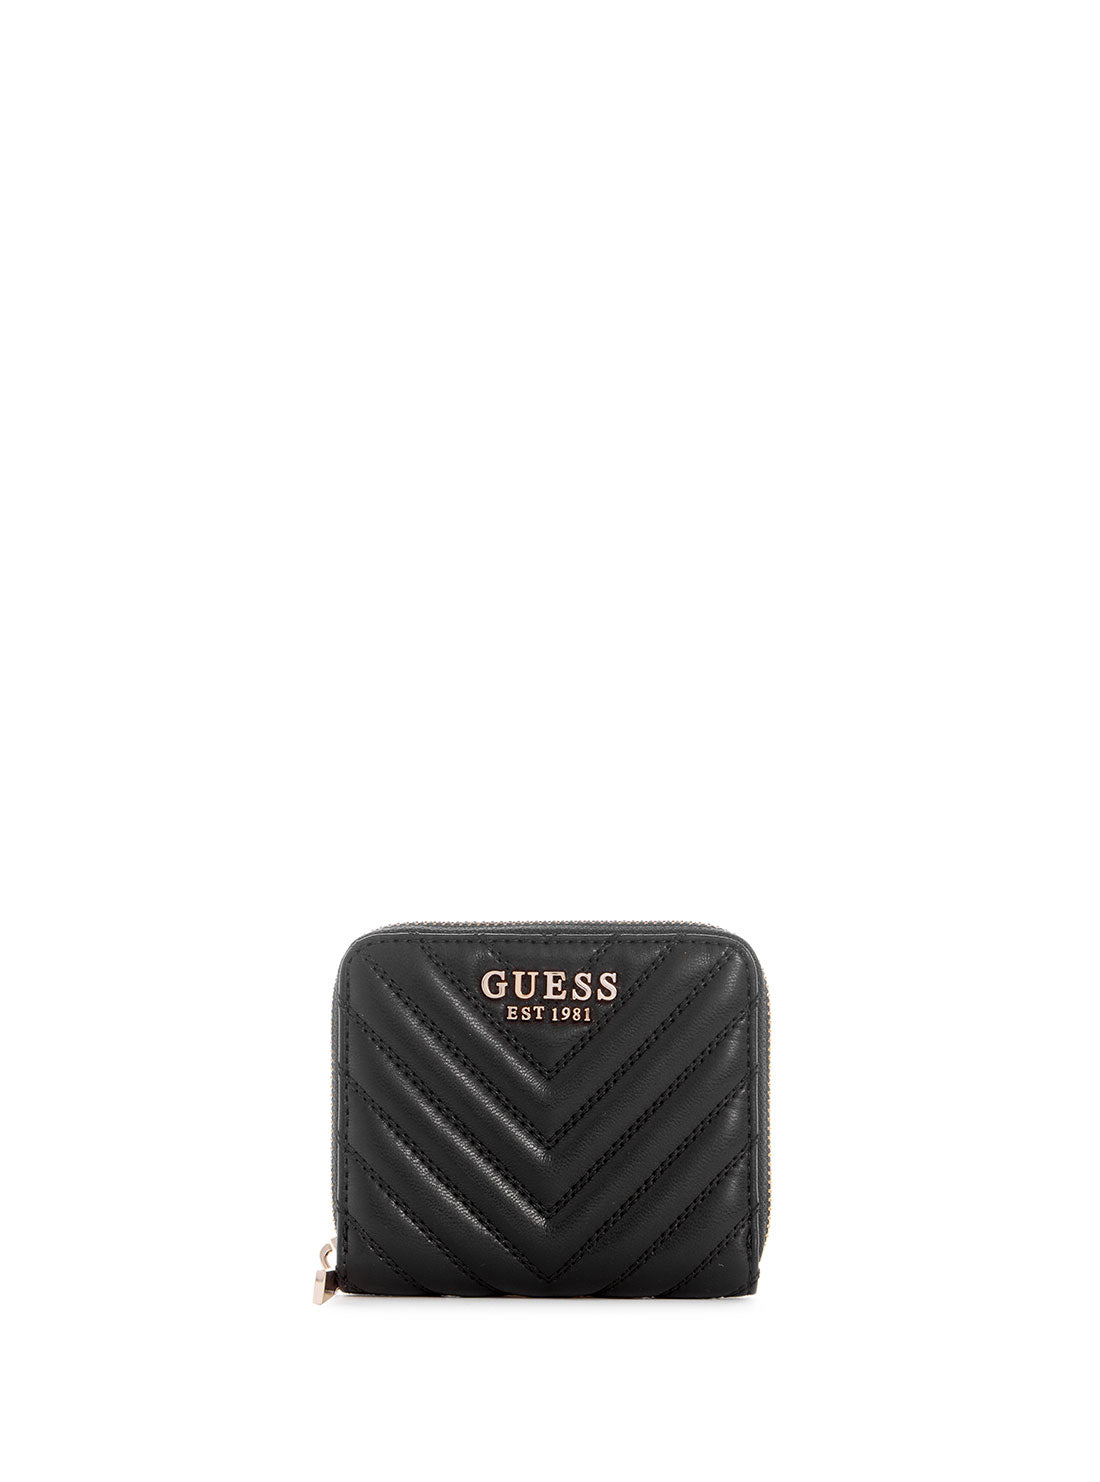 GUESS Women's Black Keillah Quilted Small Wallet QG869037 Front View